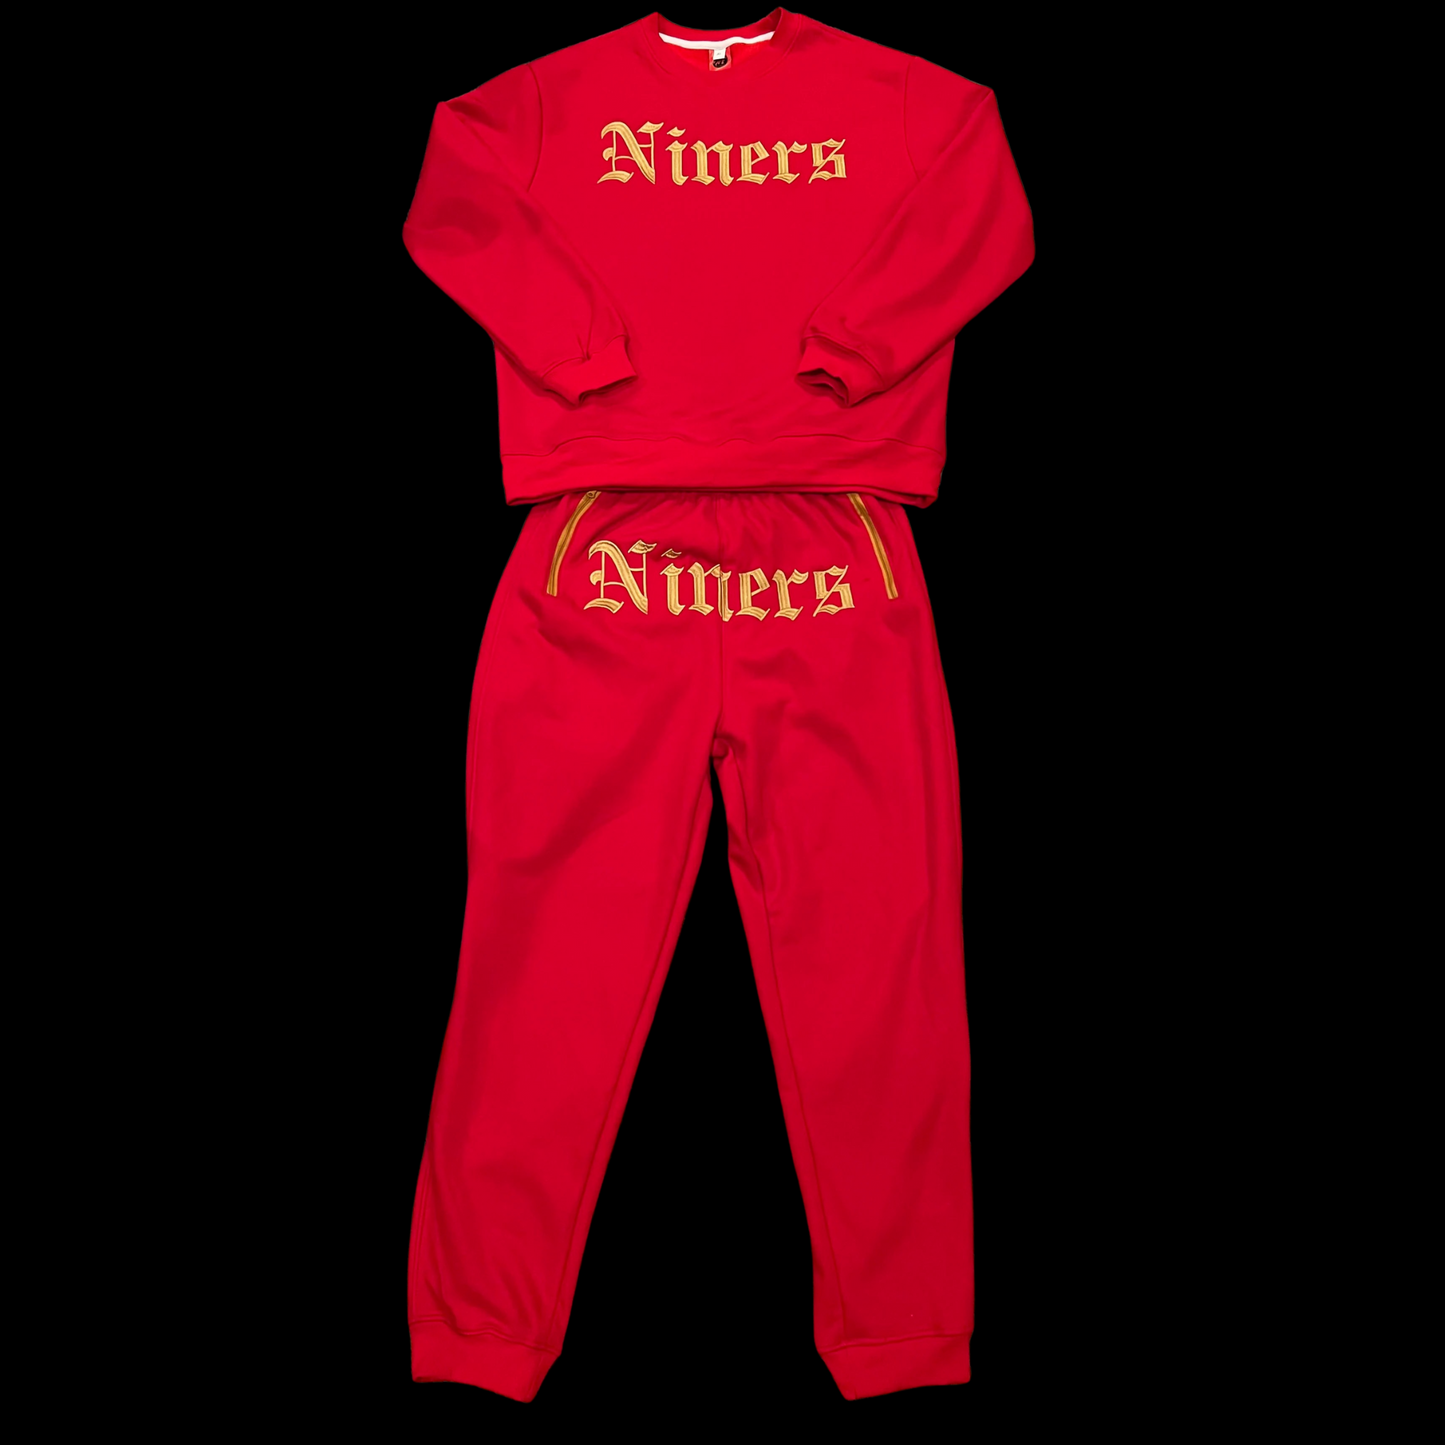 NINERS Fully Embroidered Youth size sweatsuit